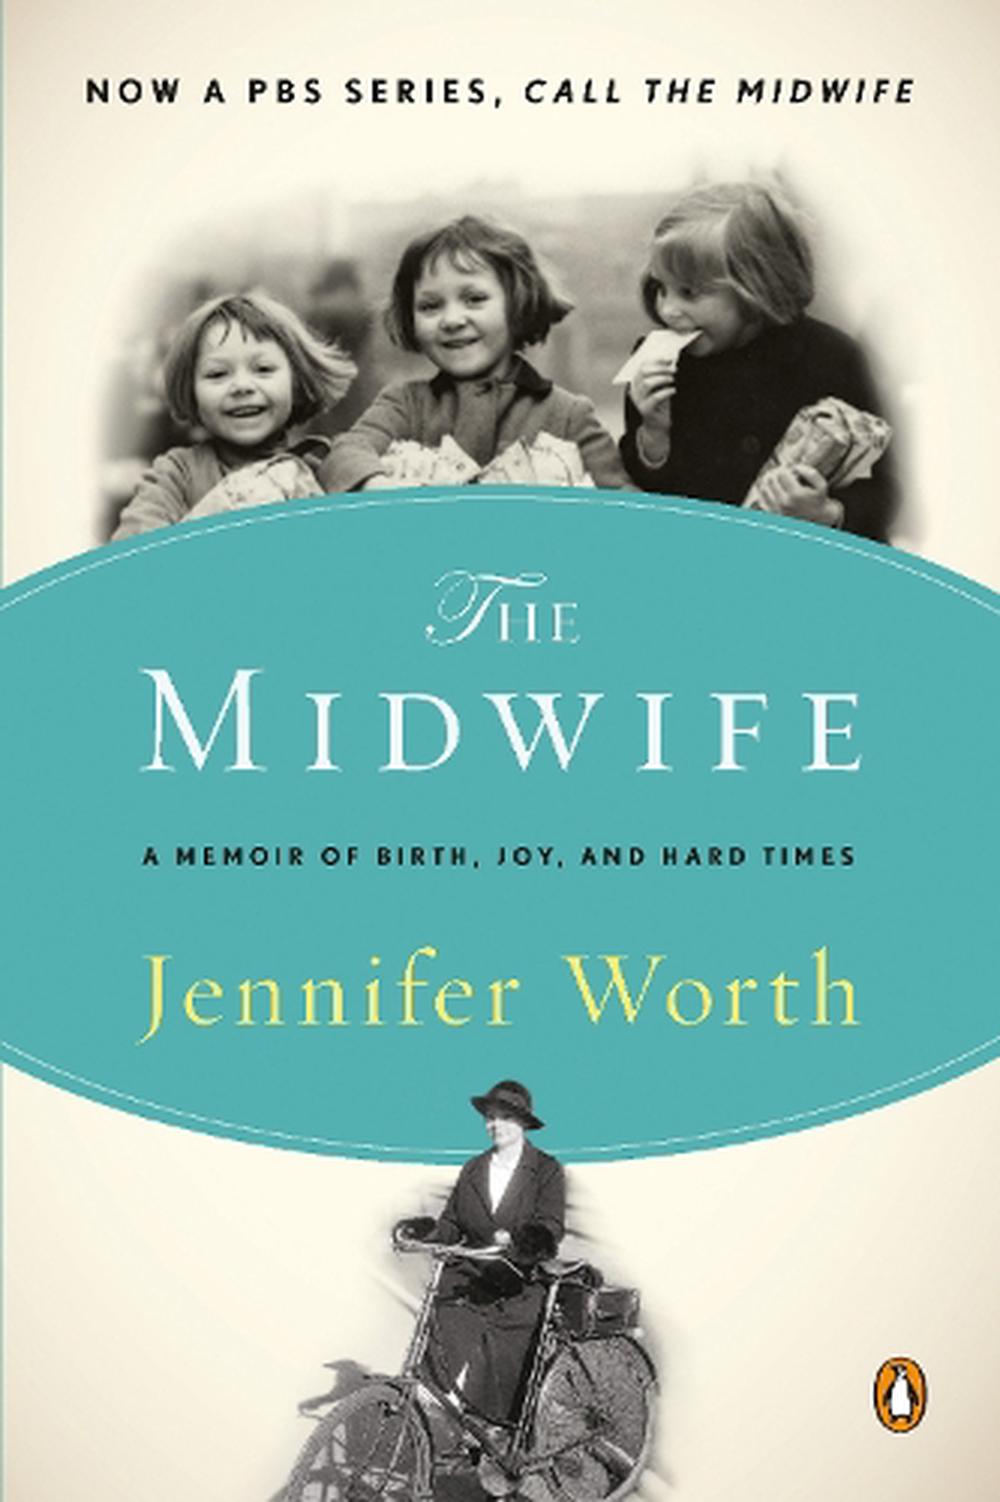 The Midwife by Jennifer Worth